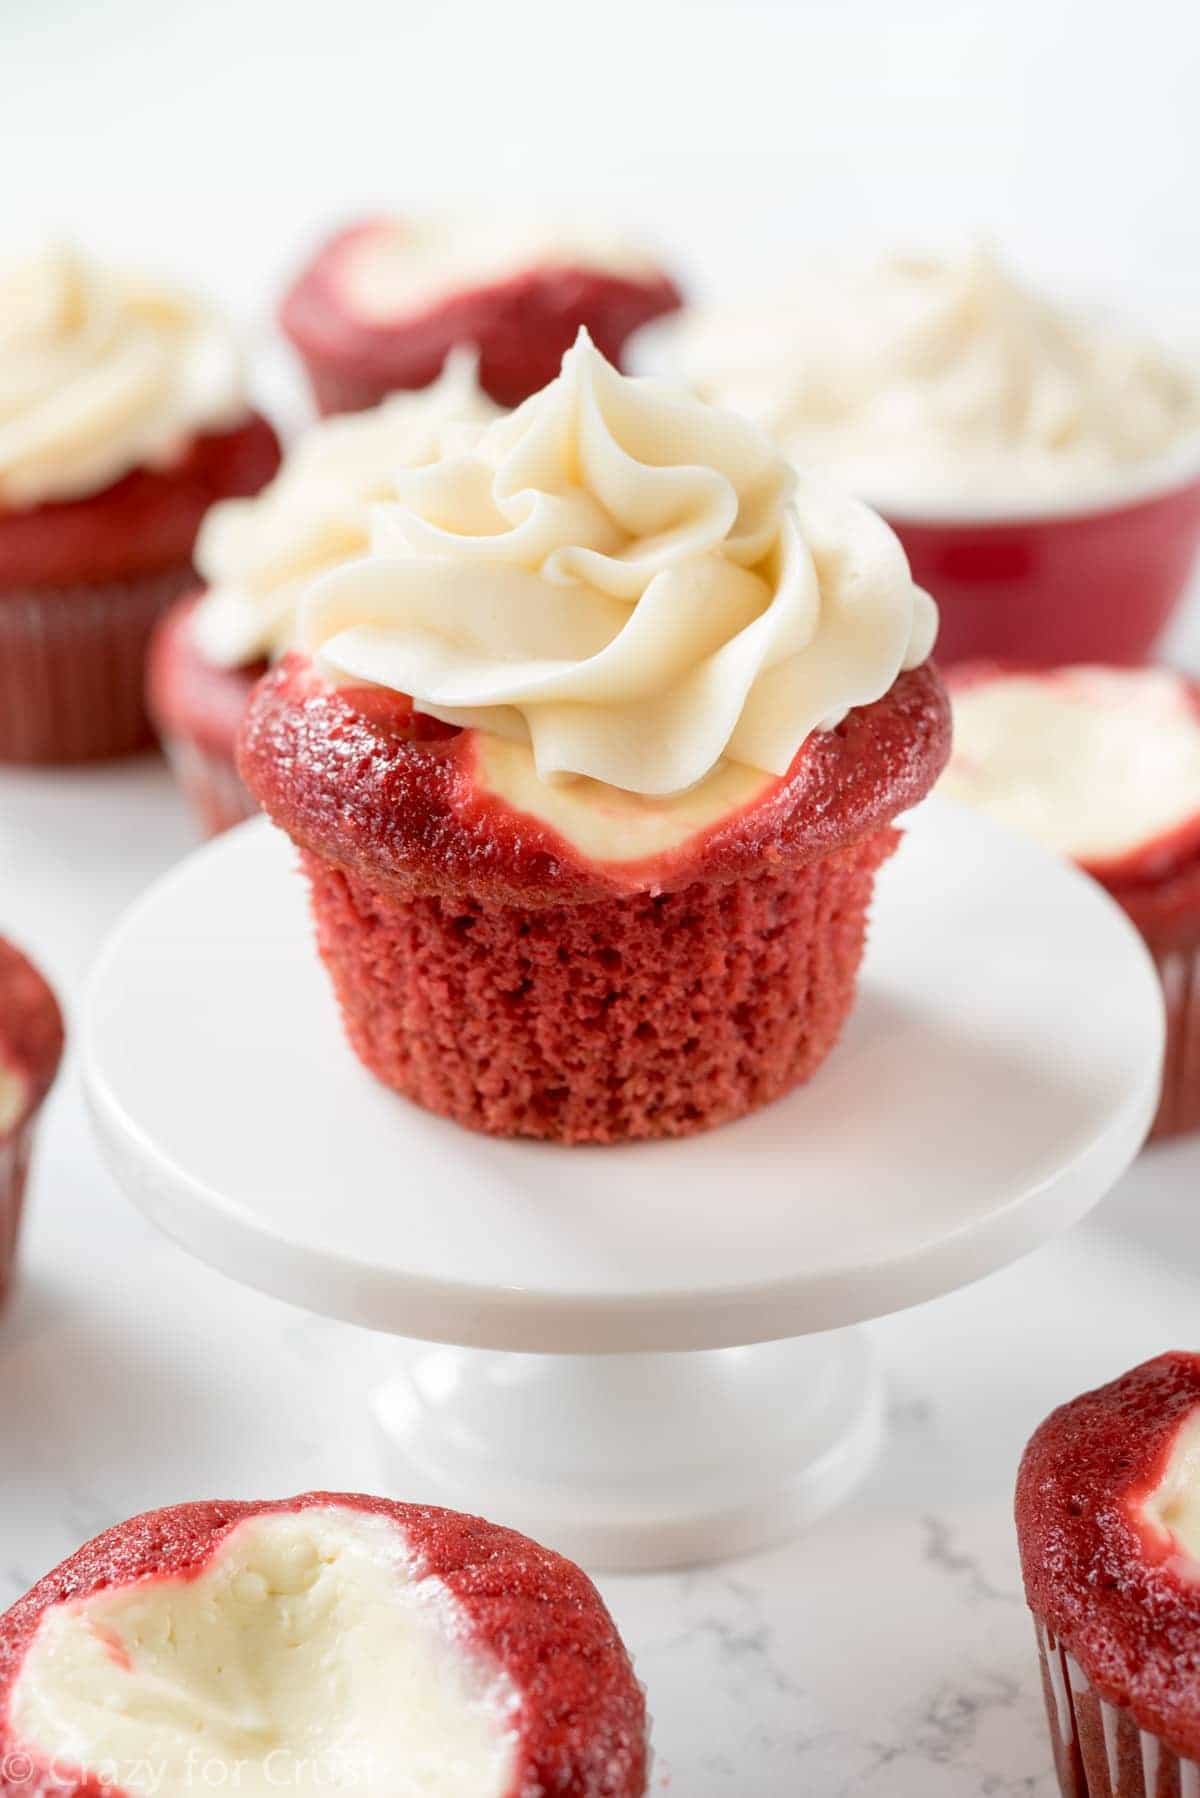 Red Velvet Cream Cheese Cupcakes - these easy cupcakes are completely from scratch. Red Velvet Cake filled with cheesecake and topped with cream cheese frosting - an amazing cupcake recipe!